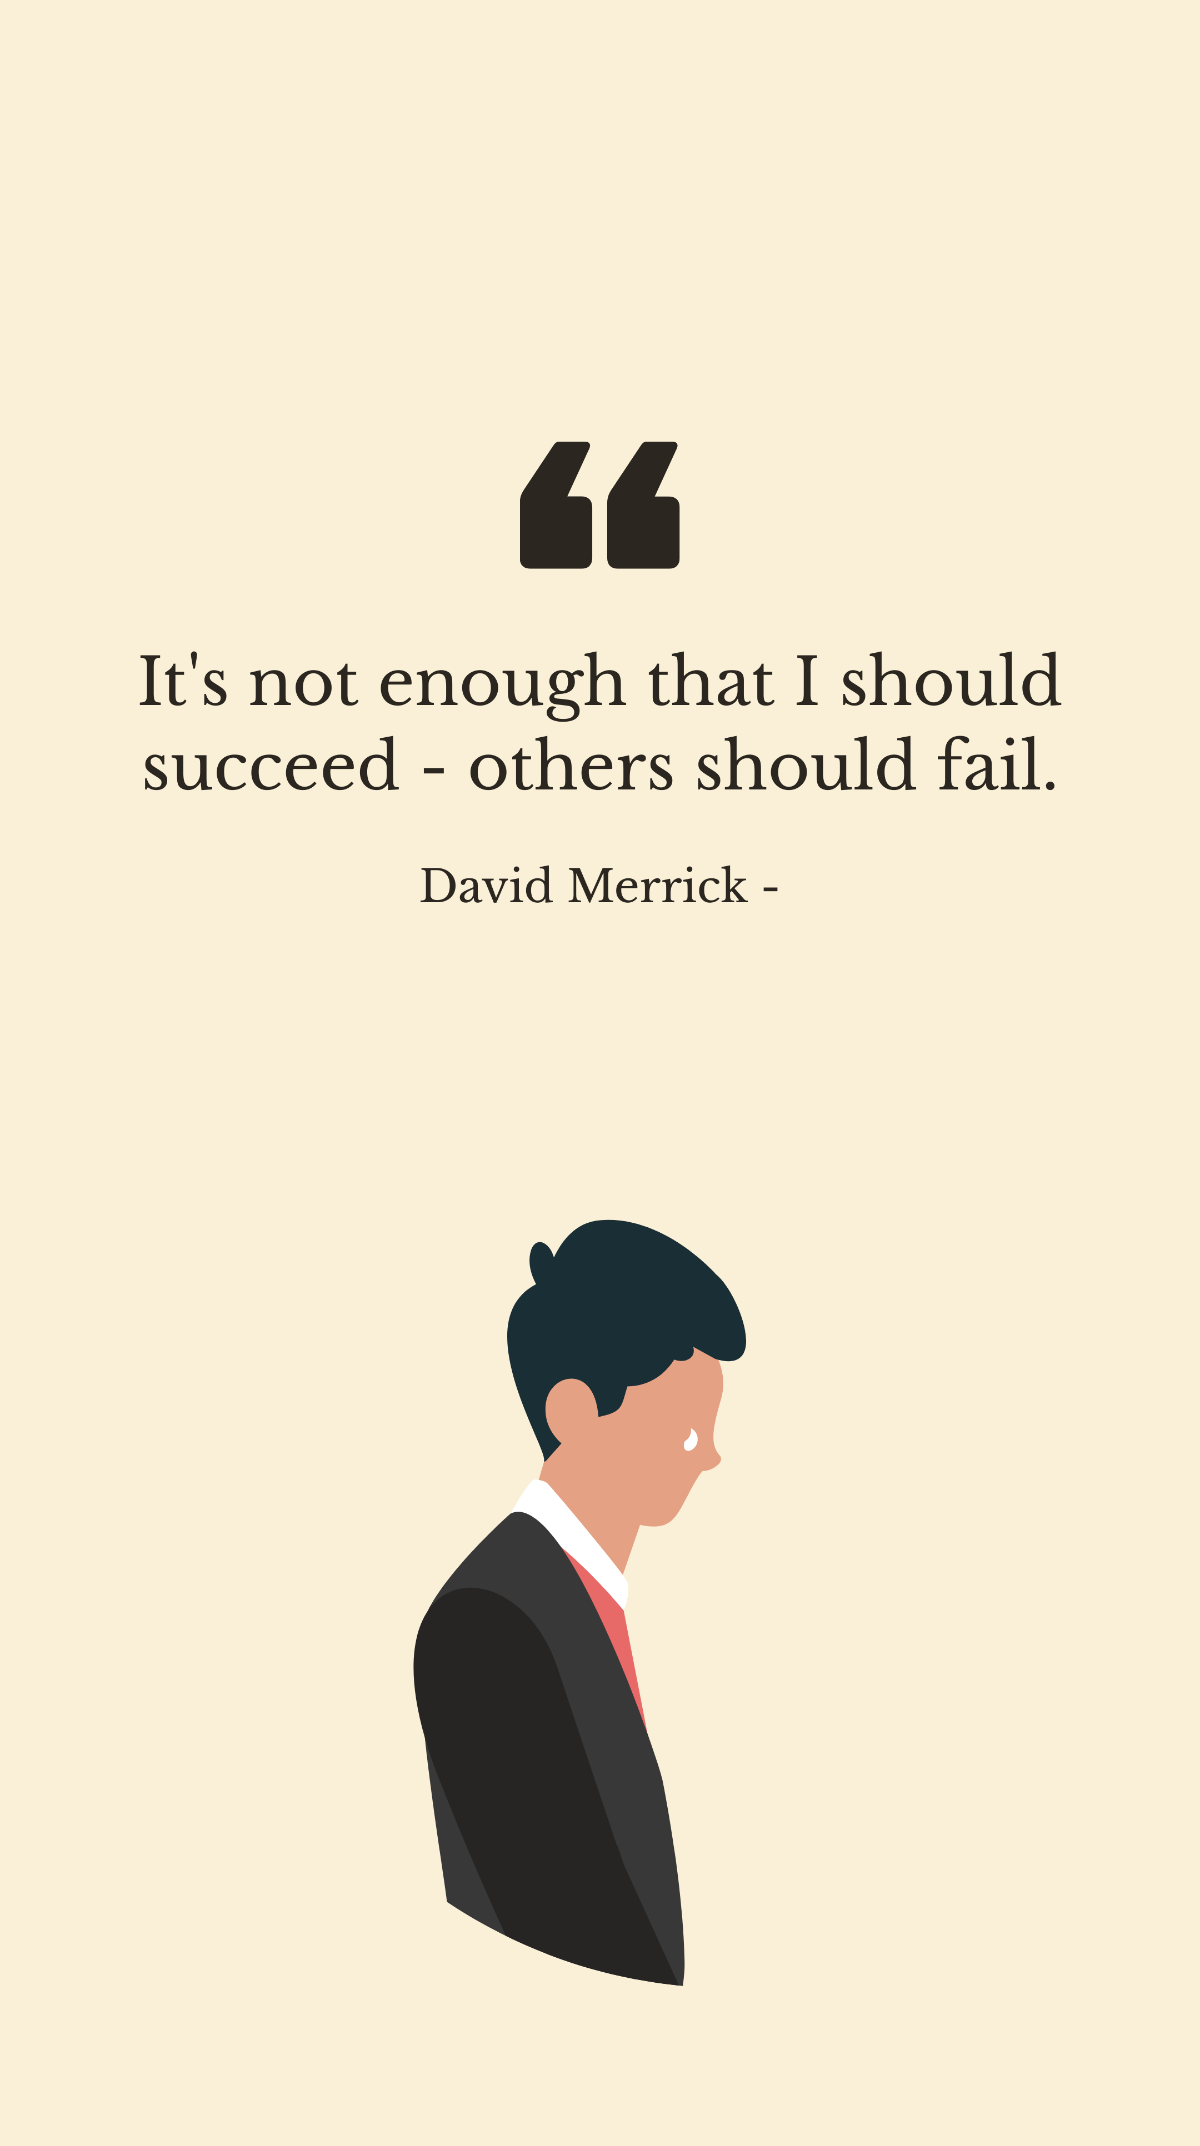 Free David Merrick - It's not enough that I should succeed - others should fail. Template